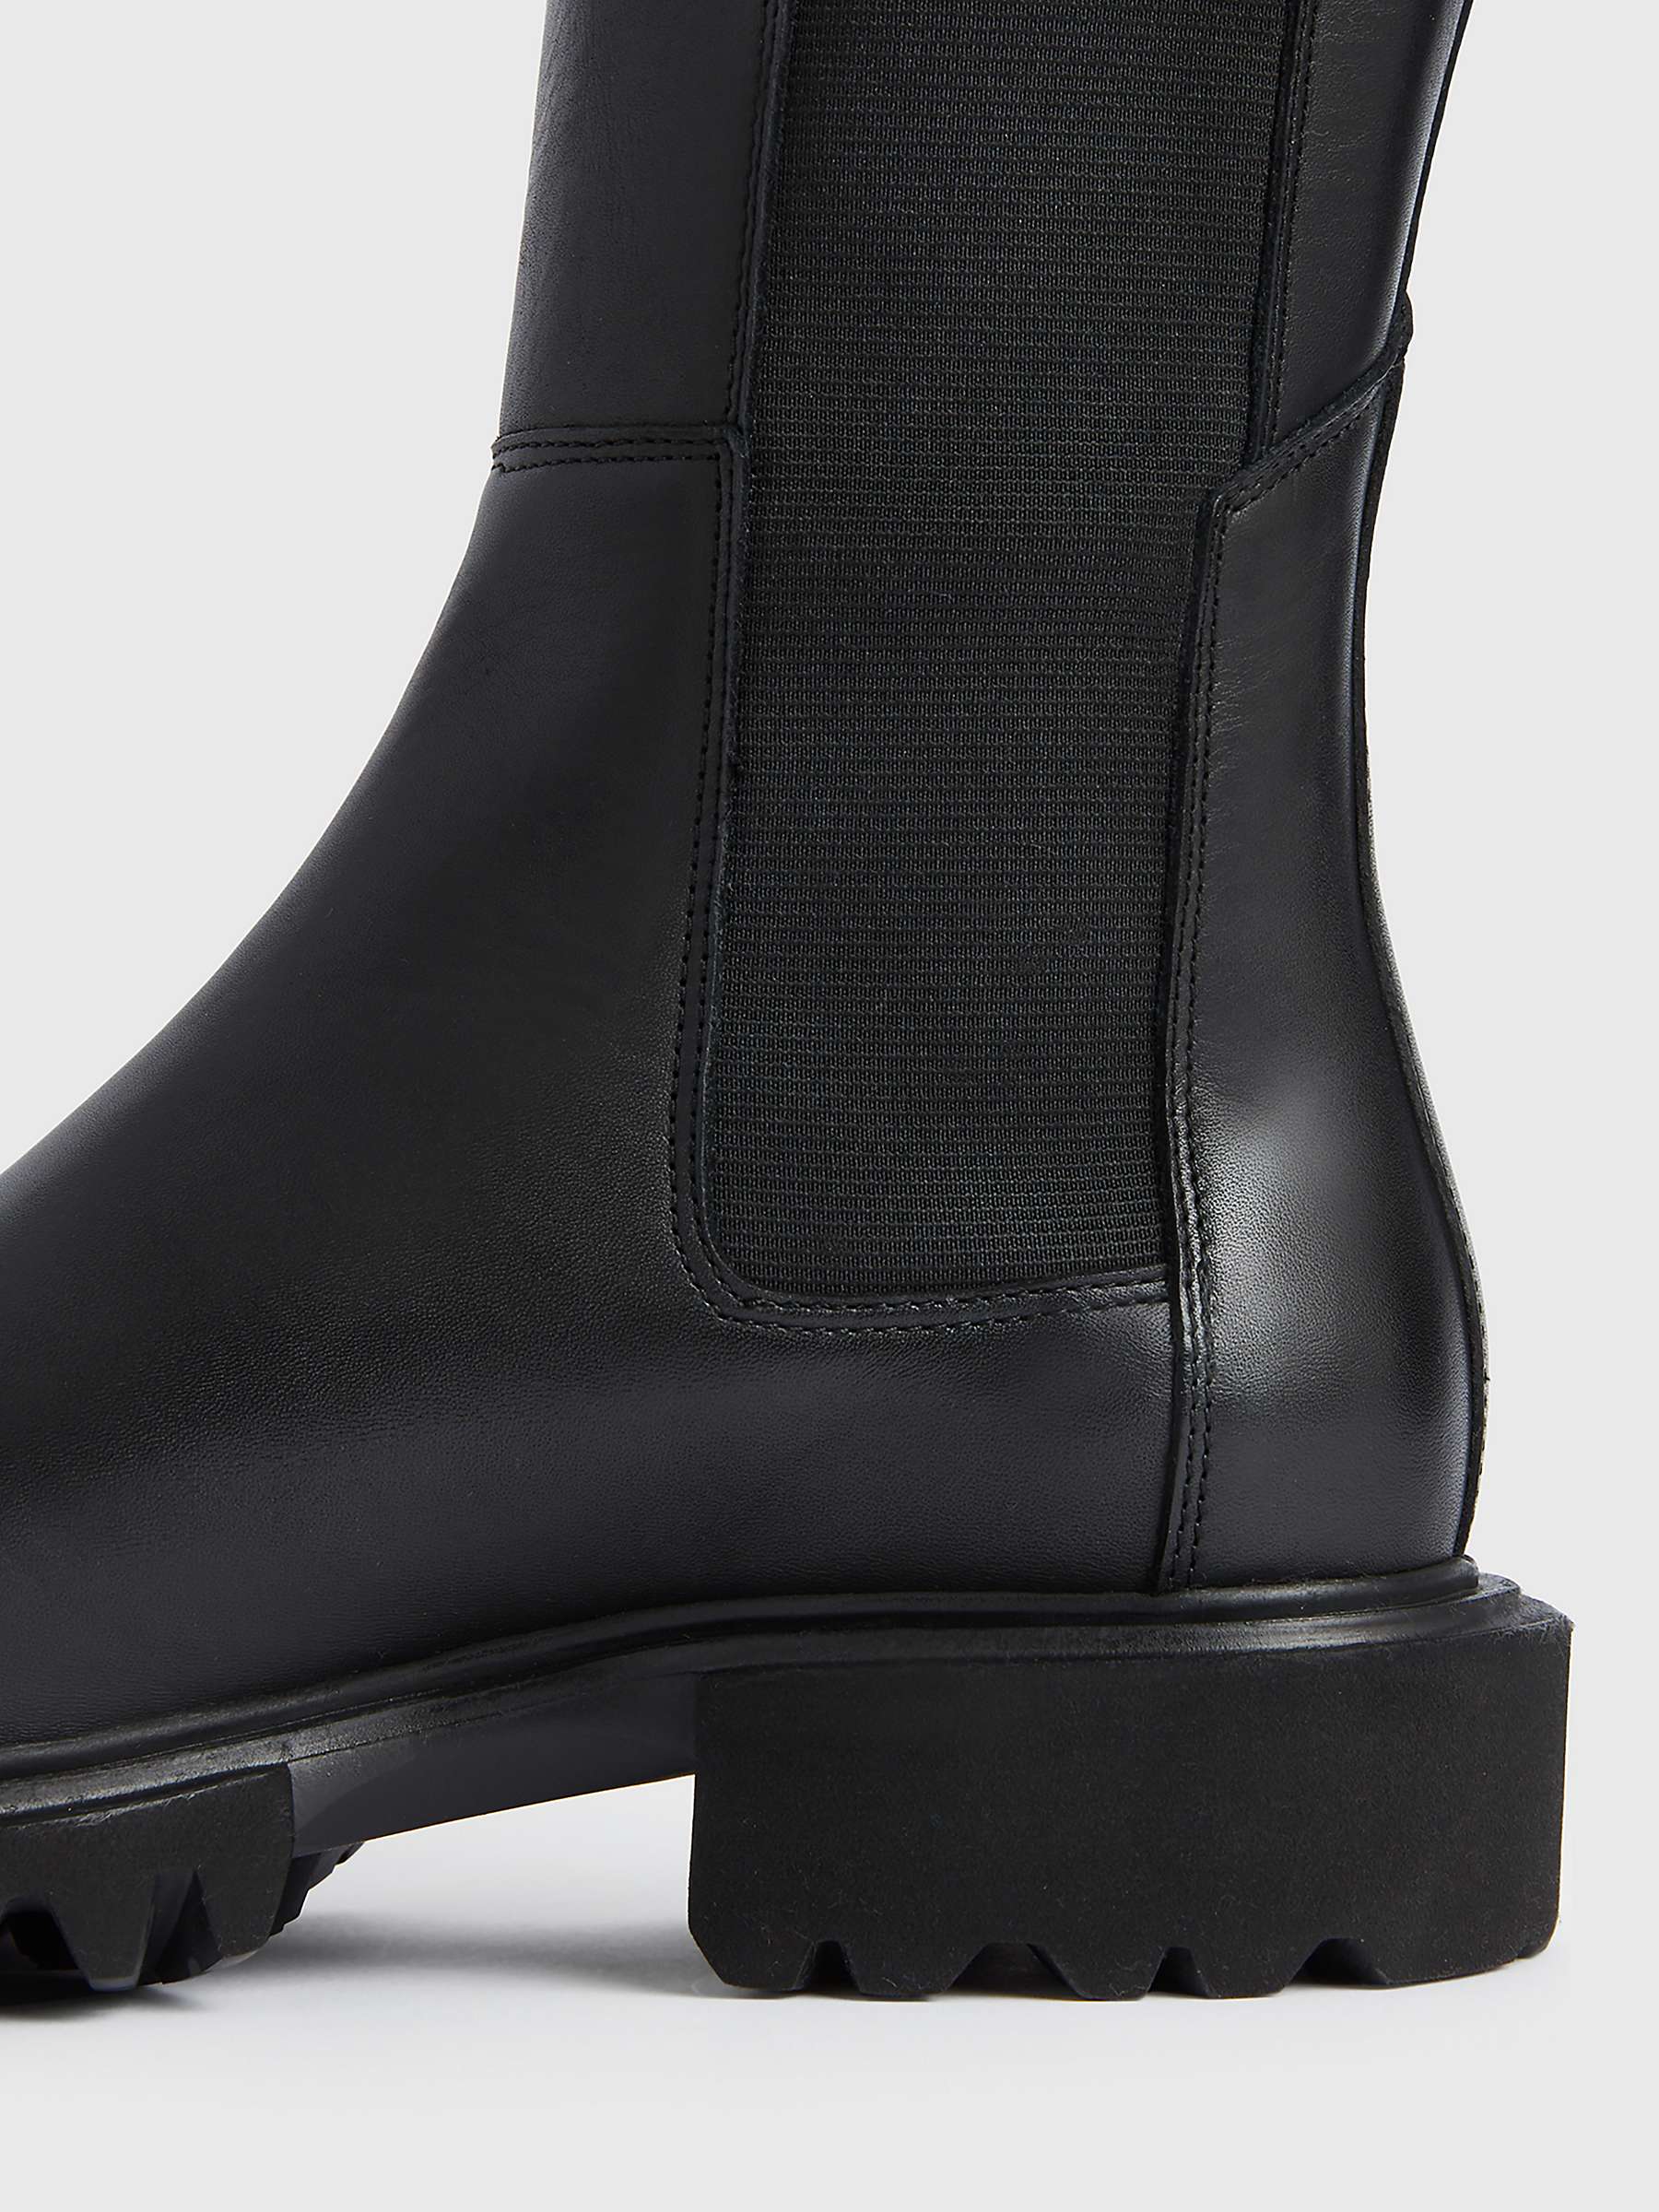 Buy AllSaints Maeve Leather Knee High Boots Online at johnlewis.com